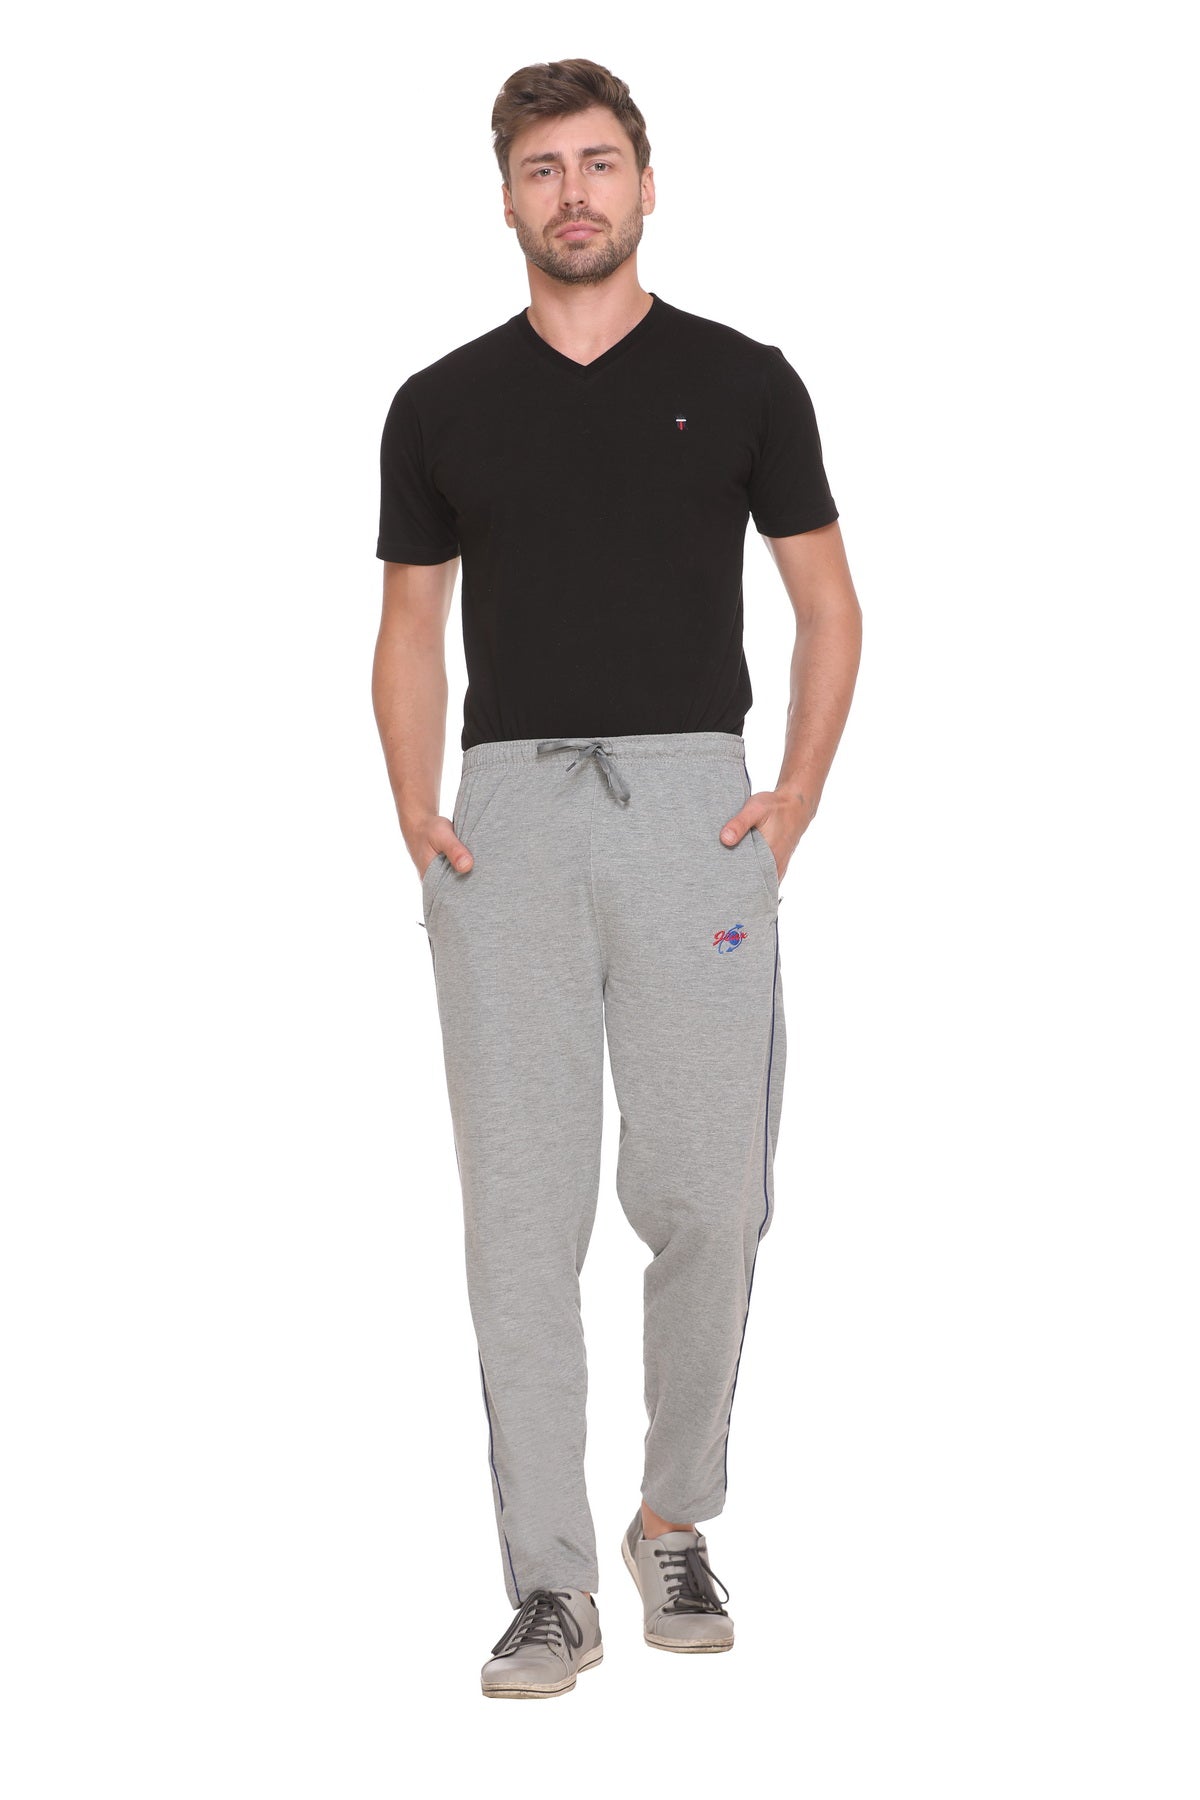 Stylish Grey Jinxer Winter Fleece Track Pants (Plus Size) For Men Online In India